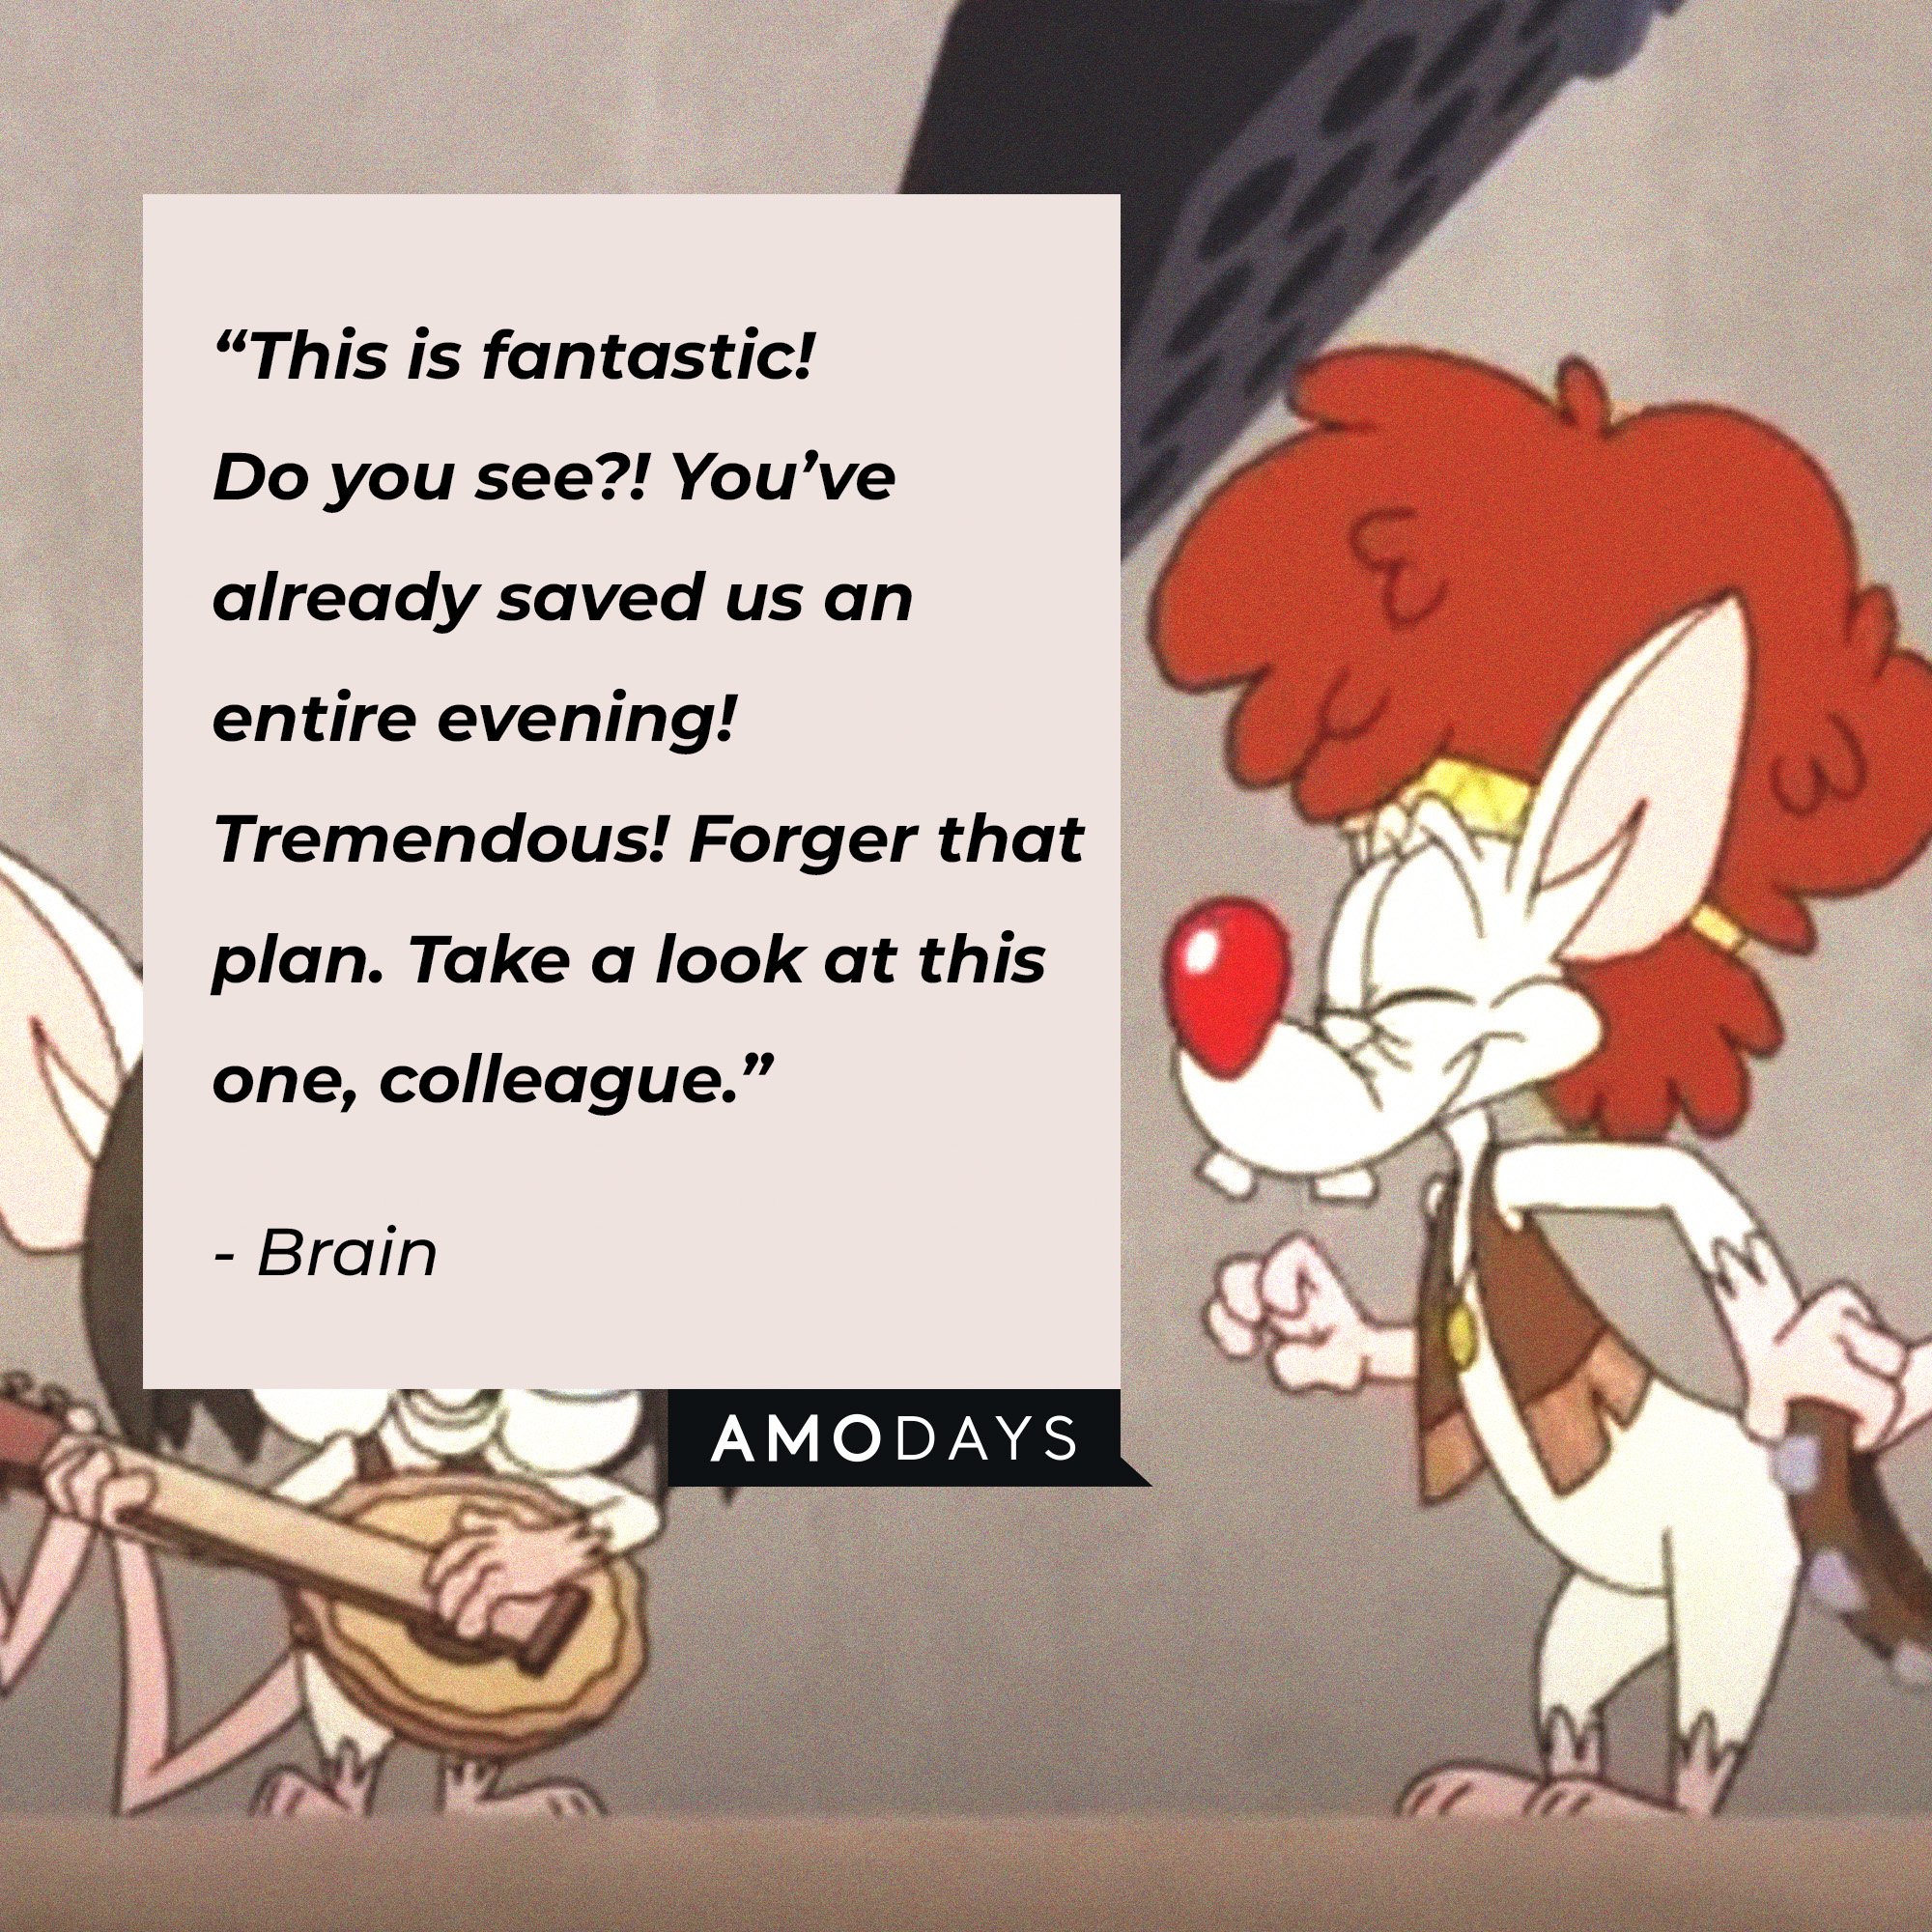 Brain's quote: “This is fantastic! Do you see?! You’ve already saved us an entire evening! Tremendous! Forger that plan. Take a look at this one, colleague.” | Image: AmoDays